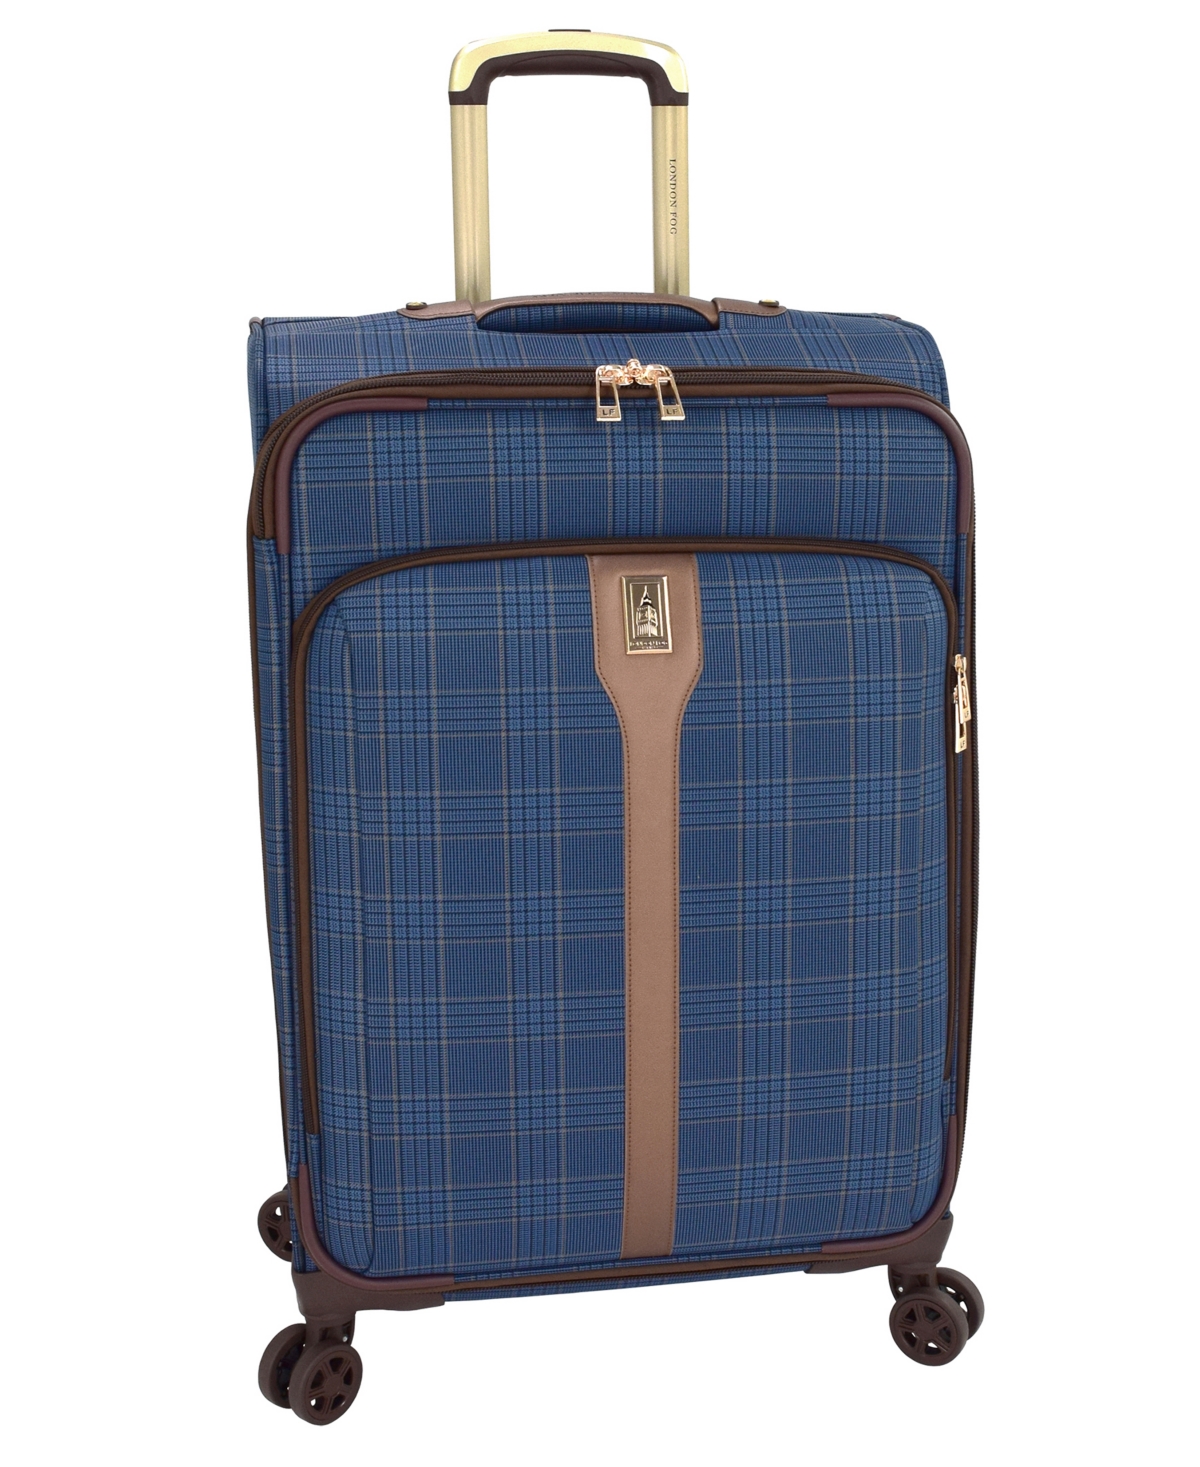 Brentwood Iii 25" Expandable Spinner Soft Side, Created for Macy's - Navy, Bronze